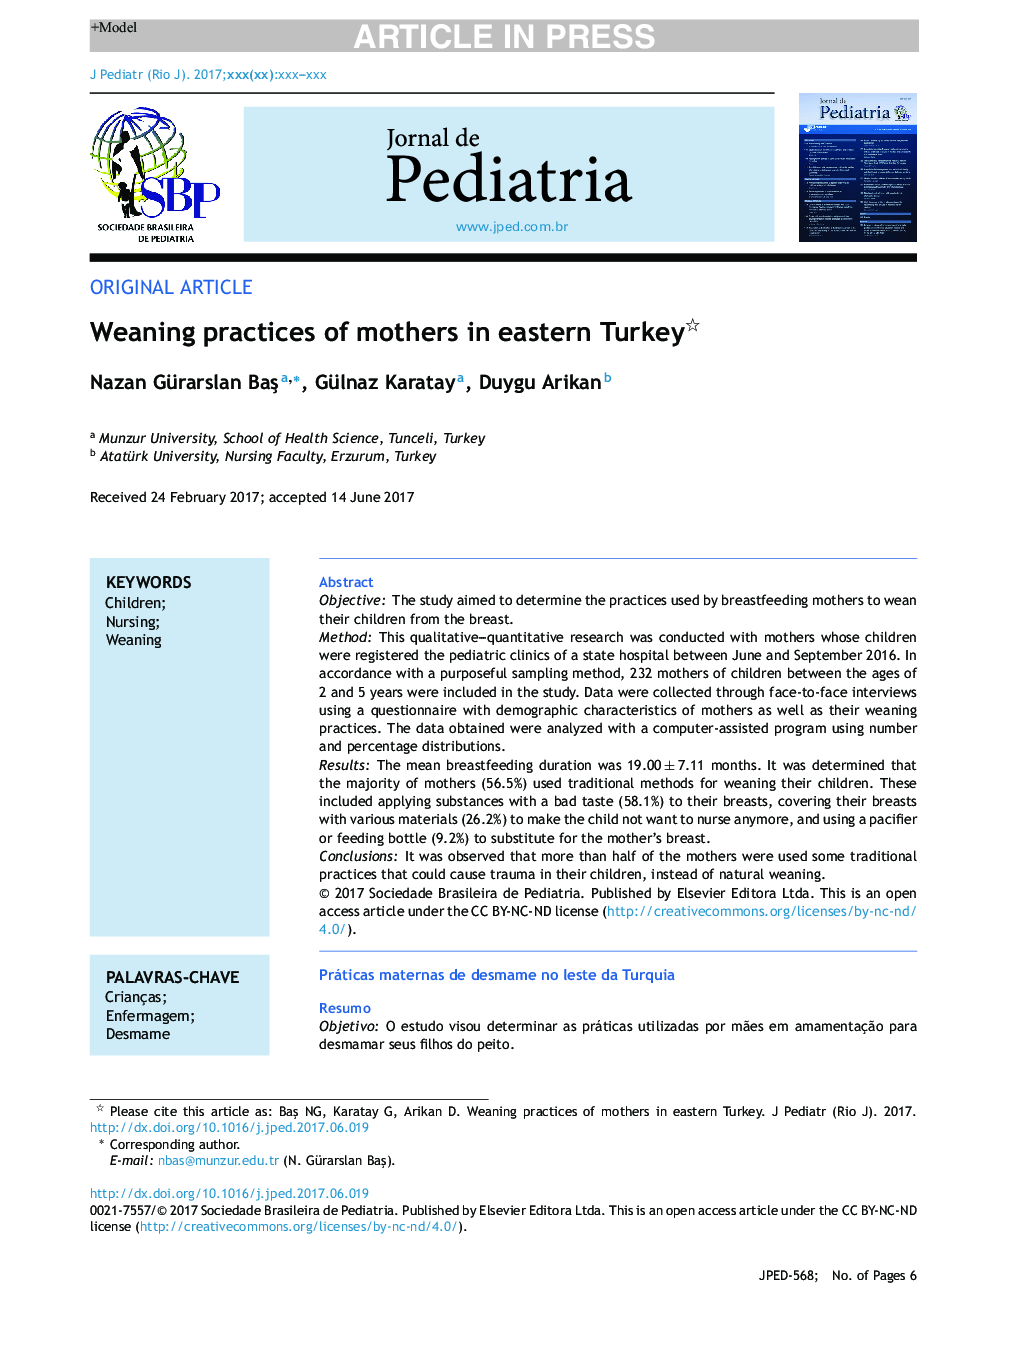 Weaning practices of mothers in eastern Turkey